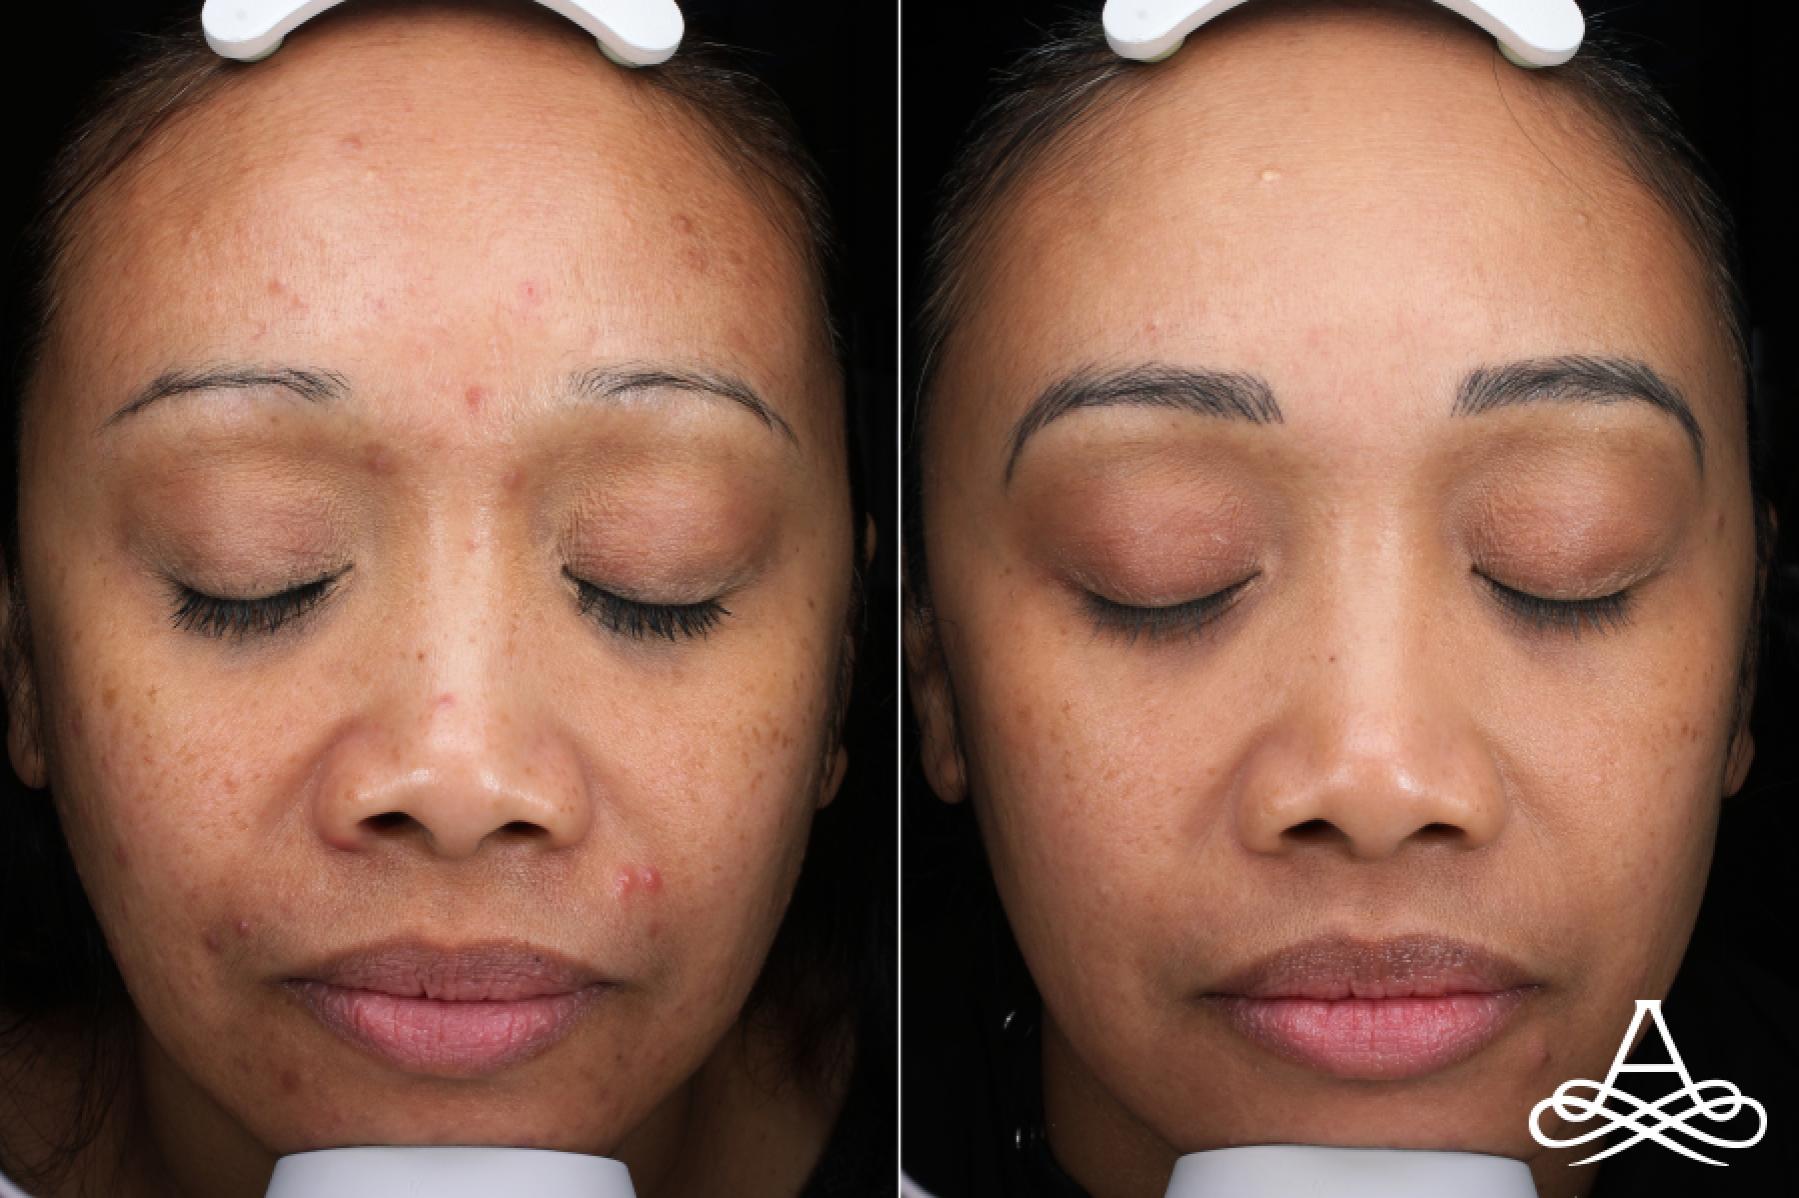 Acne Scars: Patient 2 - Before and After  